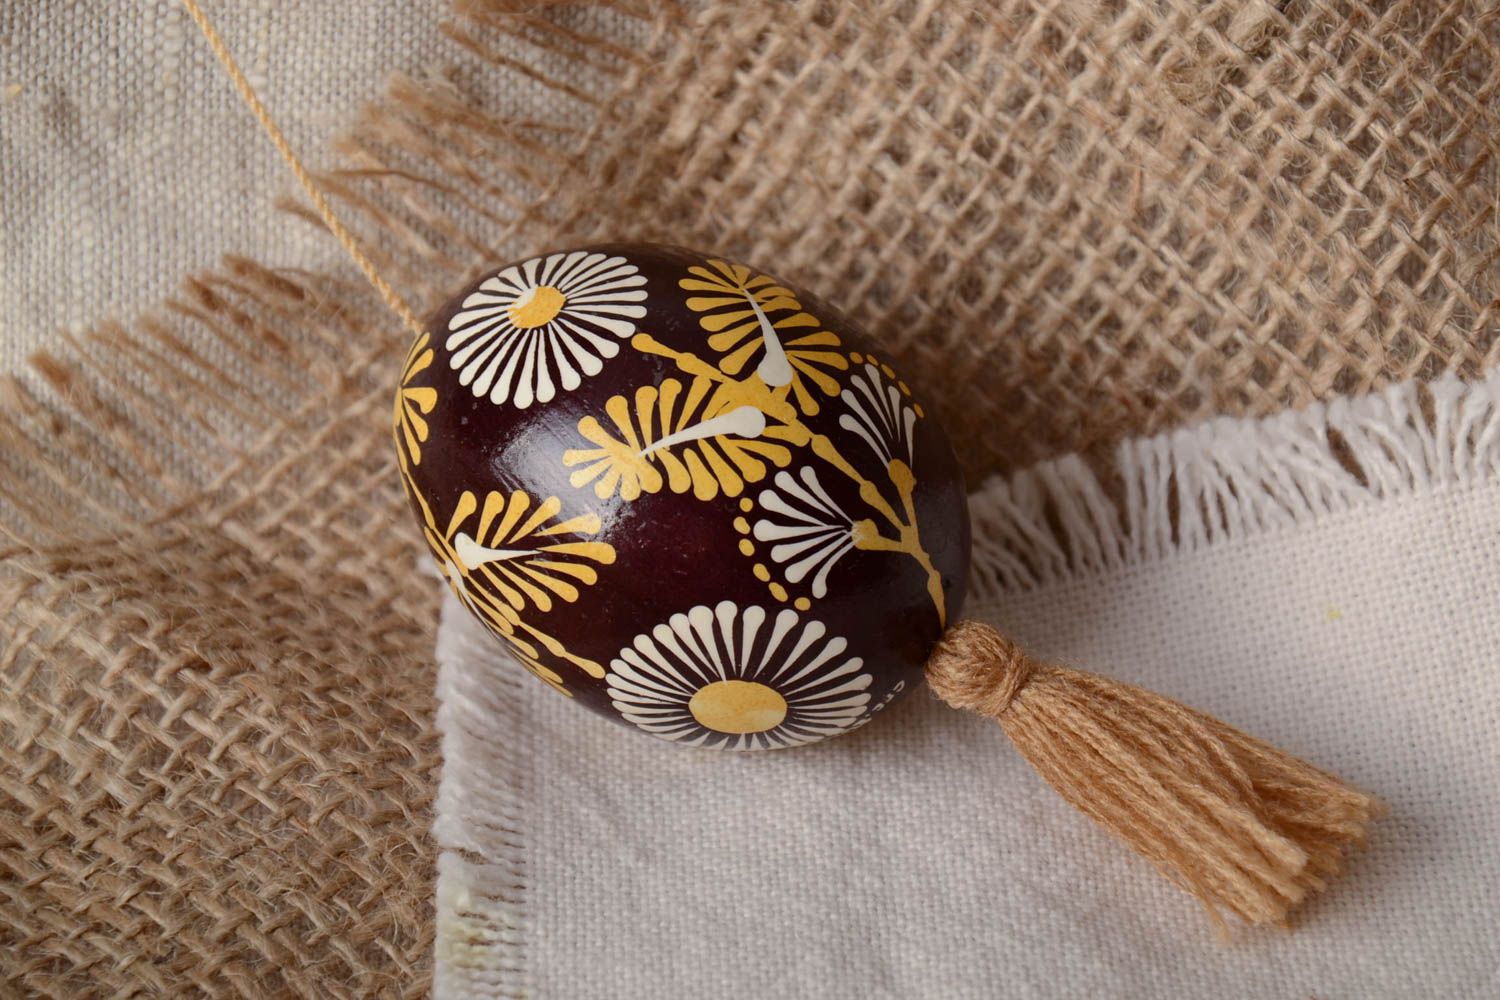 Handmade painted Easter egg with tassel for interior decor photo 1